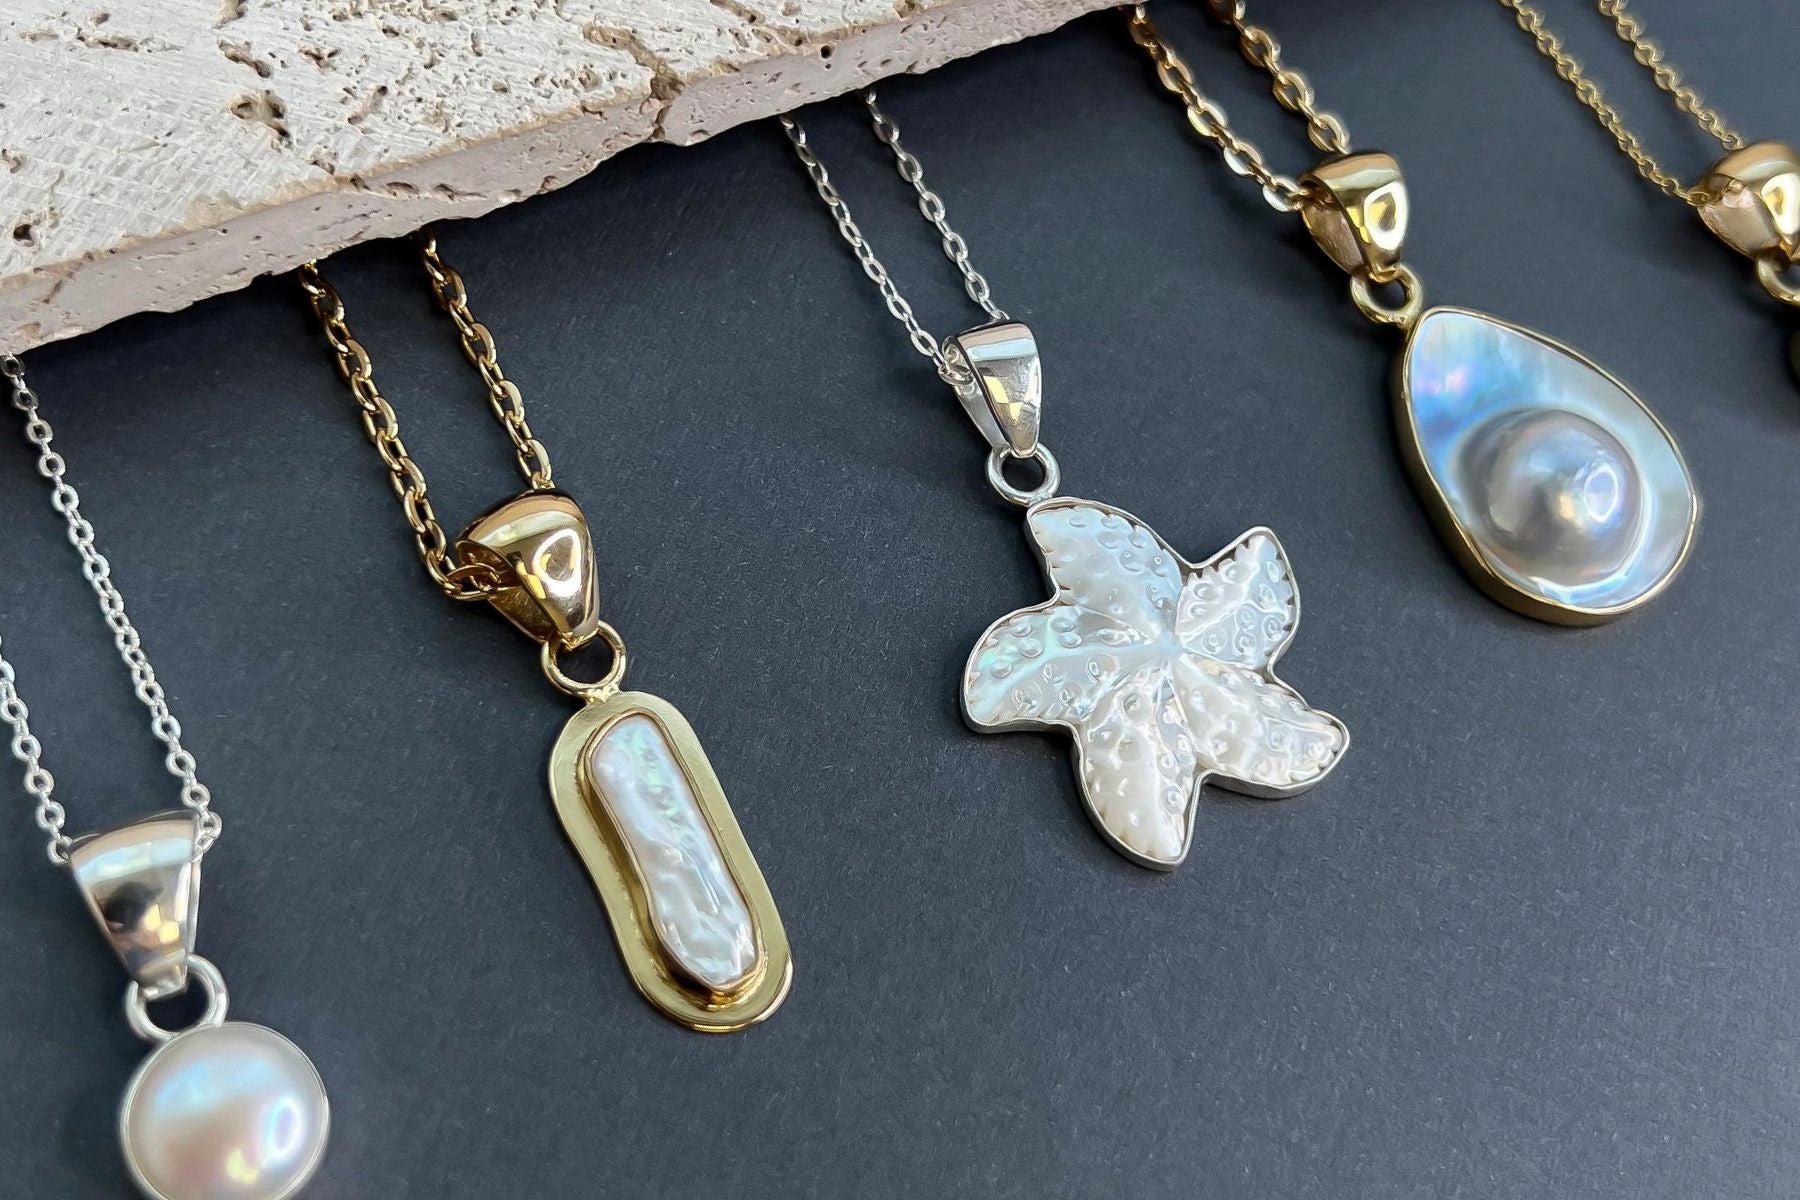 Different types of pearl pendants by Charles Albert Jewelry